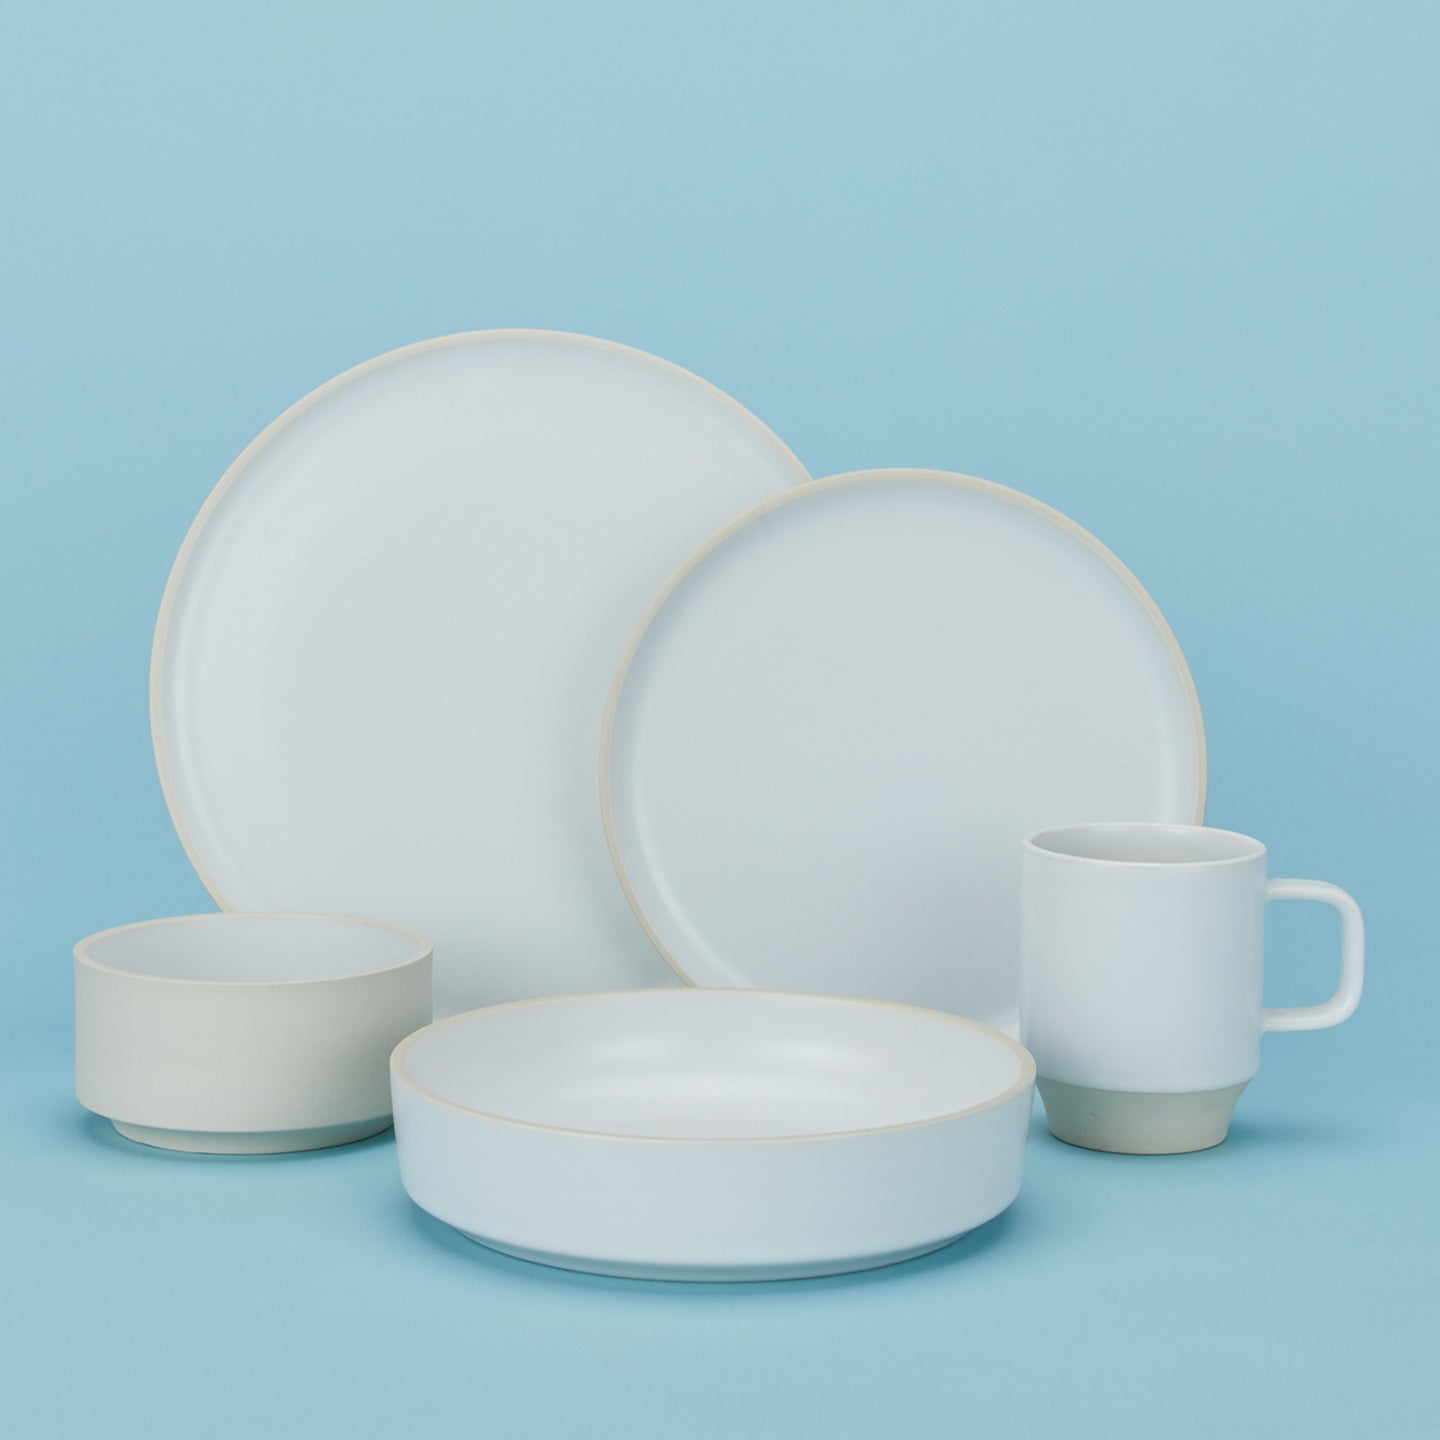 Group of Modernist Dinnerware including low bowl, cereal bowl, salad plate, dinner plate and mug.